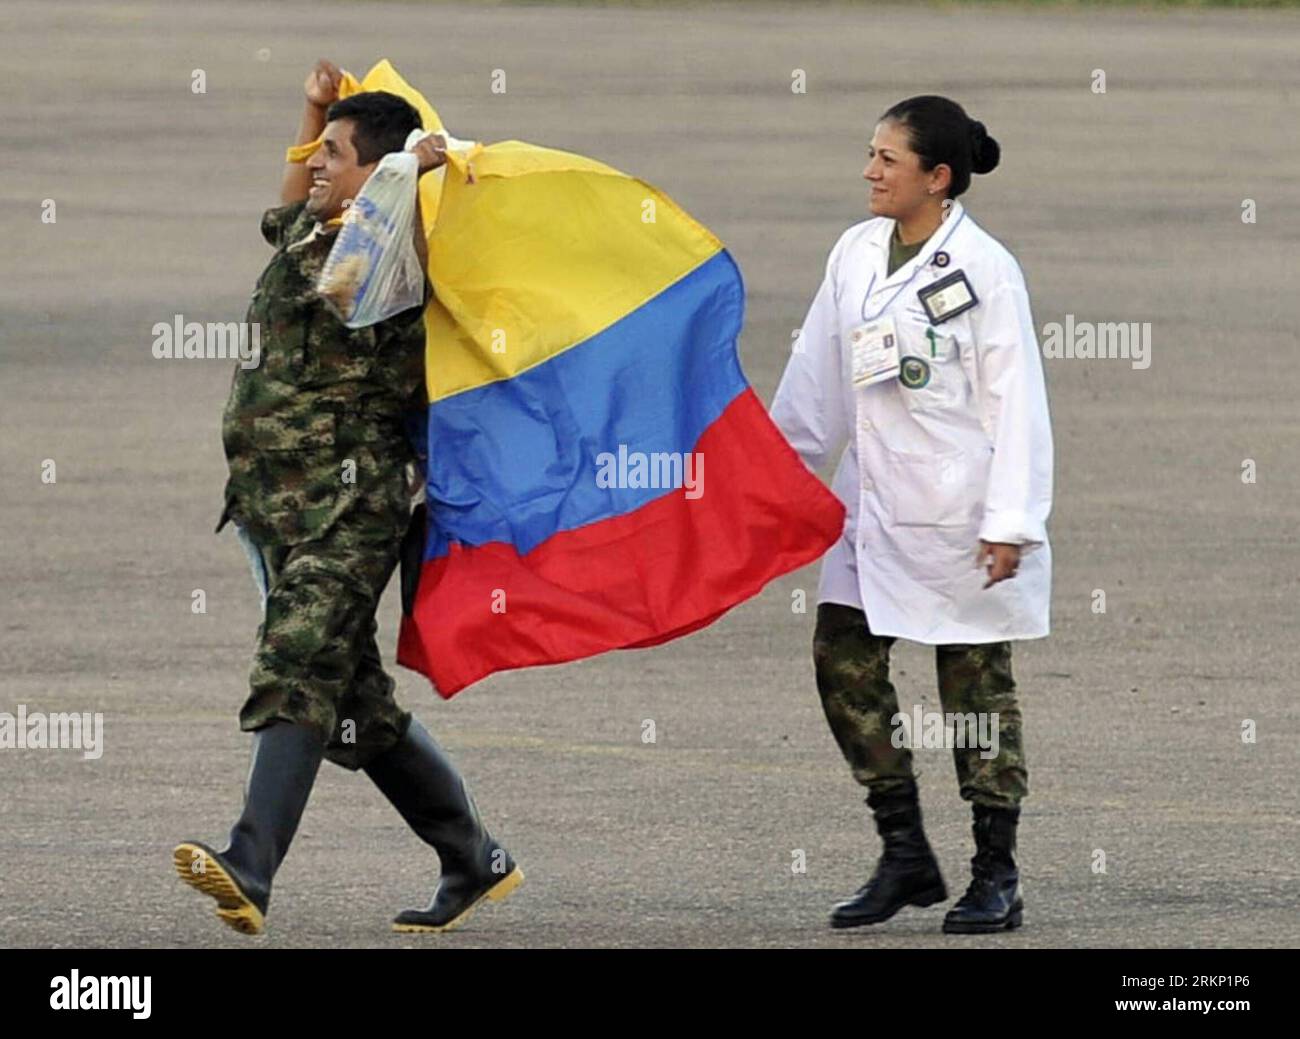 Bildnummer: 57838559  Datum: 02.04.2012  Copyright: imago/Xinhua (120403) -- VILLAVICENCIO, April 3, 2012 (Xinhua) --Colombian Army Sergeant Luis Alfredo Moreno Chagueza (L), kidnapped hostage by the Revolutionary Armed Forces of Colombia (FARC), arrives at Vanguardia of Villavicencio Airport after being released in a special operation, in Villavicencio, Colombia, on April 2, 2012. FARC rebels Monday handed over 10 hostages to a humanitarian delegation organized by the International Committee of the Red Cross (ICRC). (Xinhua) (srb) COLOMBIA-VILLAVICENCIO-FARC-HOSTAGE PUBLICATIONxNOTxINxCHN Pol Stock Photo